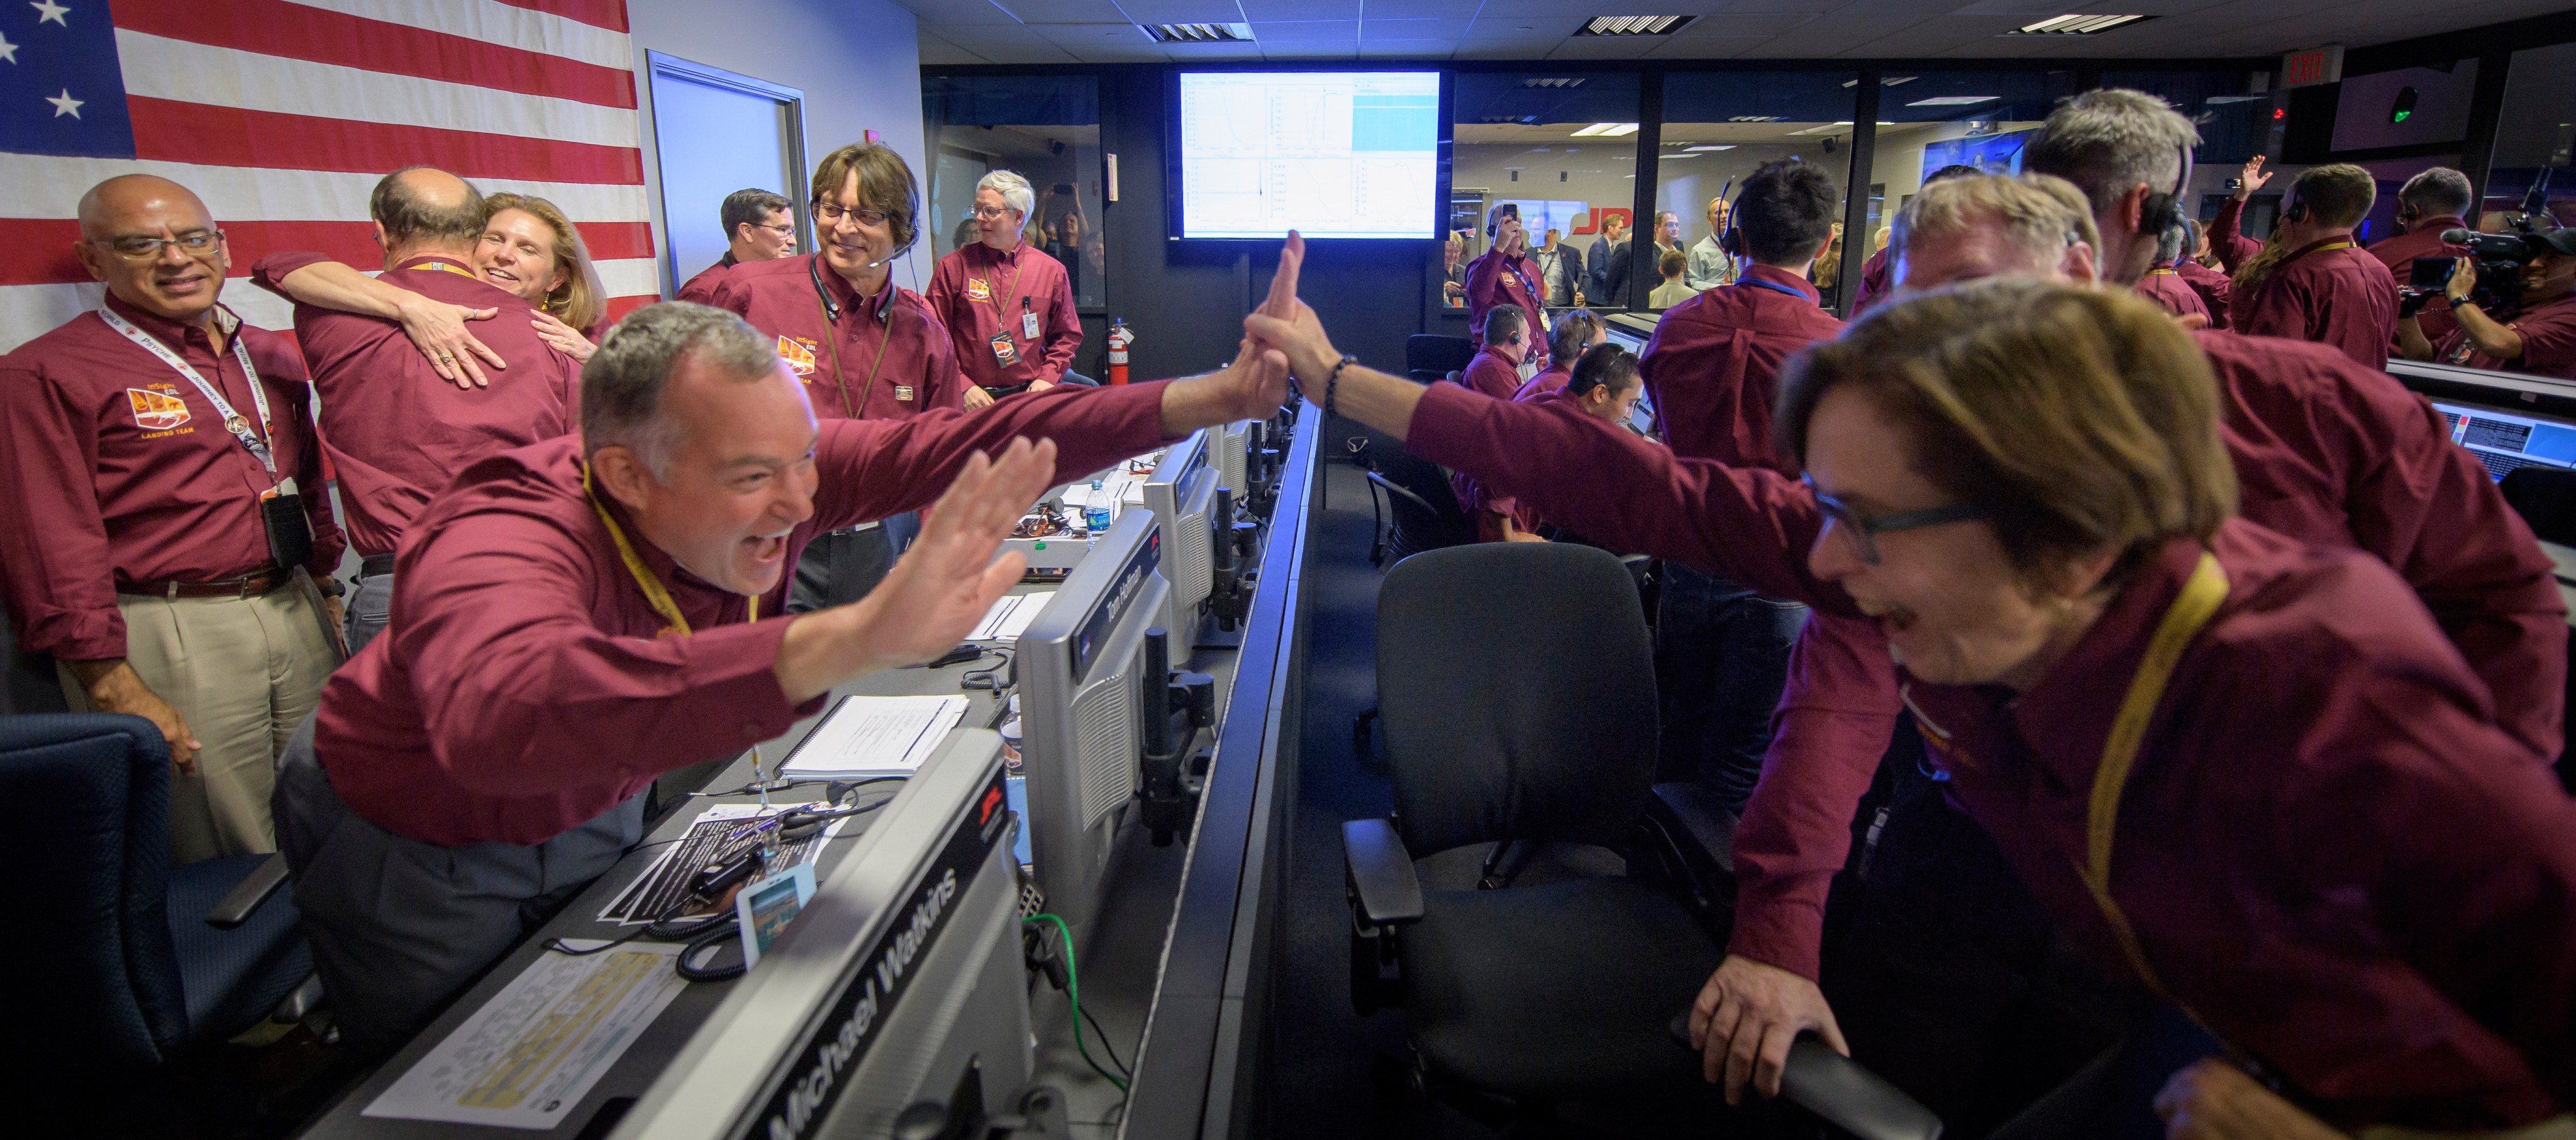 Tom Hoffman, InSight Project Manager, NASA JPL, left, and Sue Smrekar, InSight deputy principal investigator, NASA JPL, react after receiving confirmation that the Mars InSight lander successfully touched down on the surface of Mars, Monday, Nov. 26, 2018 inside the Mission Support Area at NASA's Jet Propulsion Laboratory in Pasadena, California.